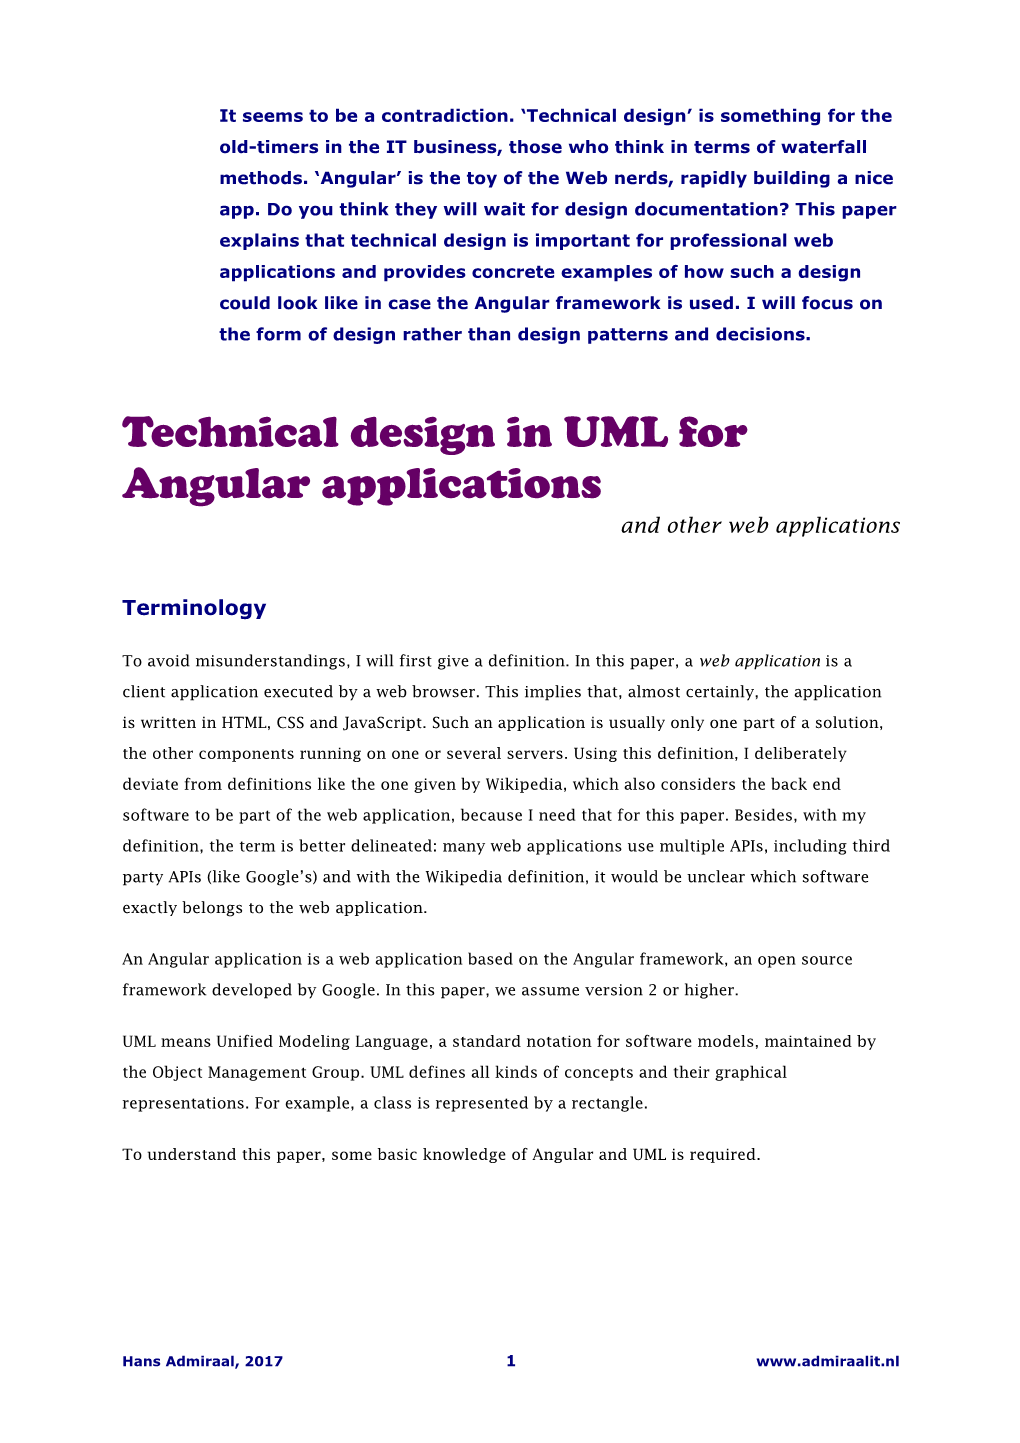 Technical Design in UML for Angular Applications and Other Web Applications